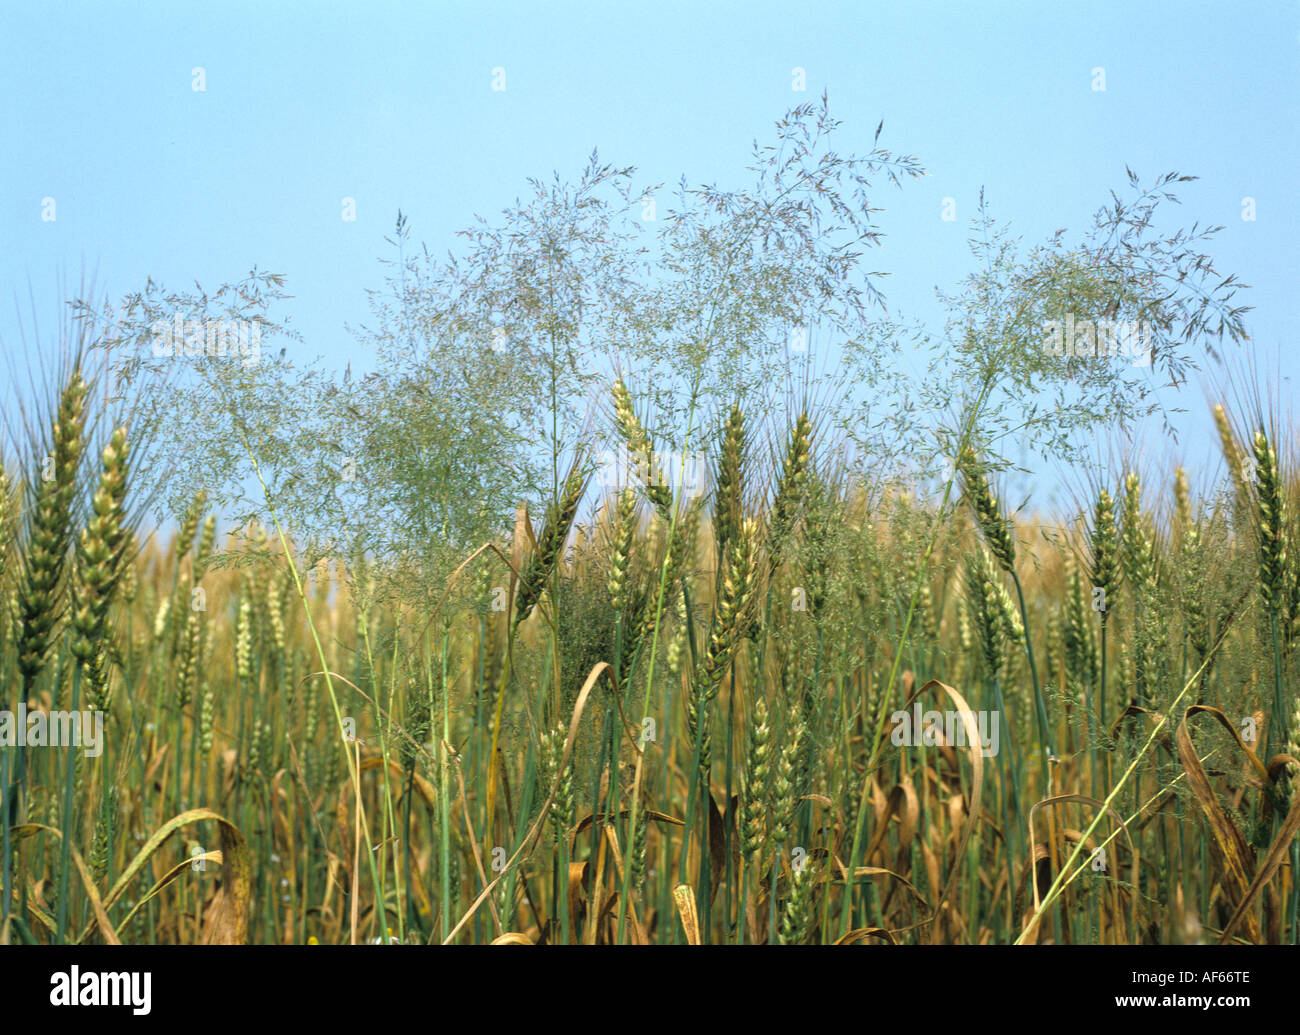 Silky bent Apera spica venti flowering and seeding grasses in a bearded wheat crop Stock Photo